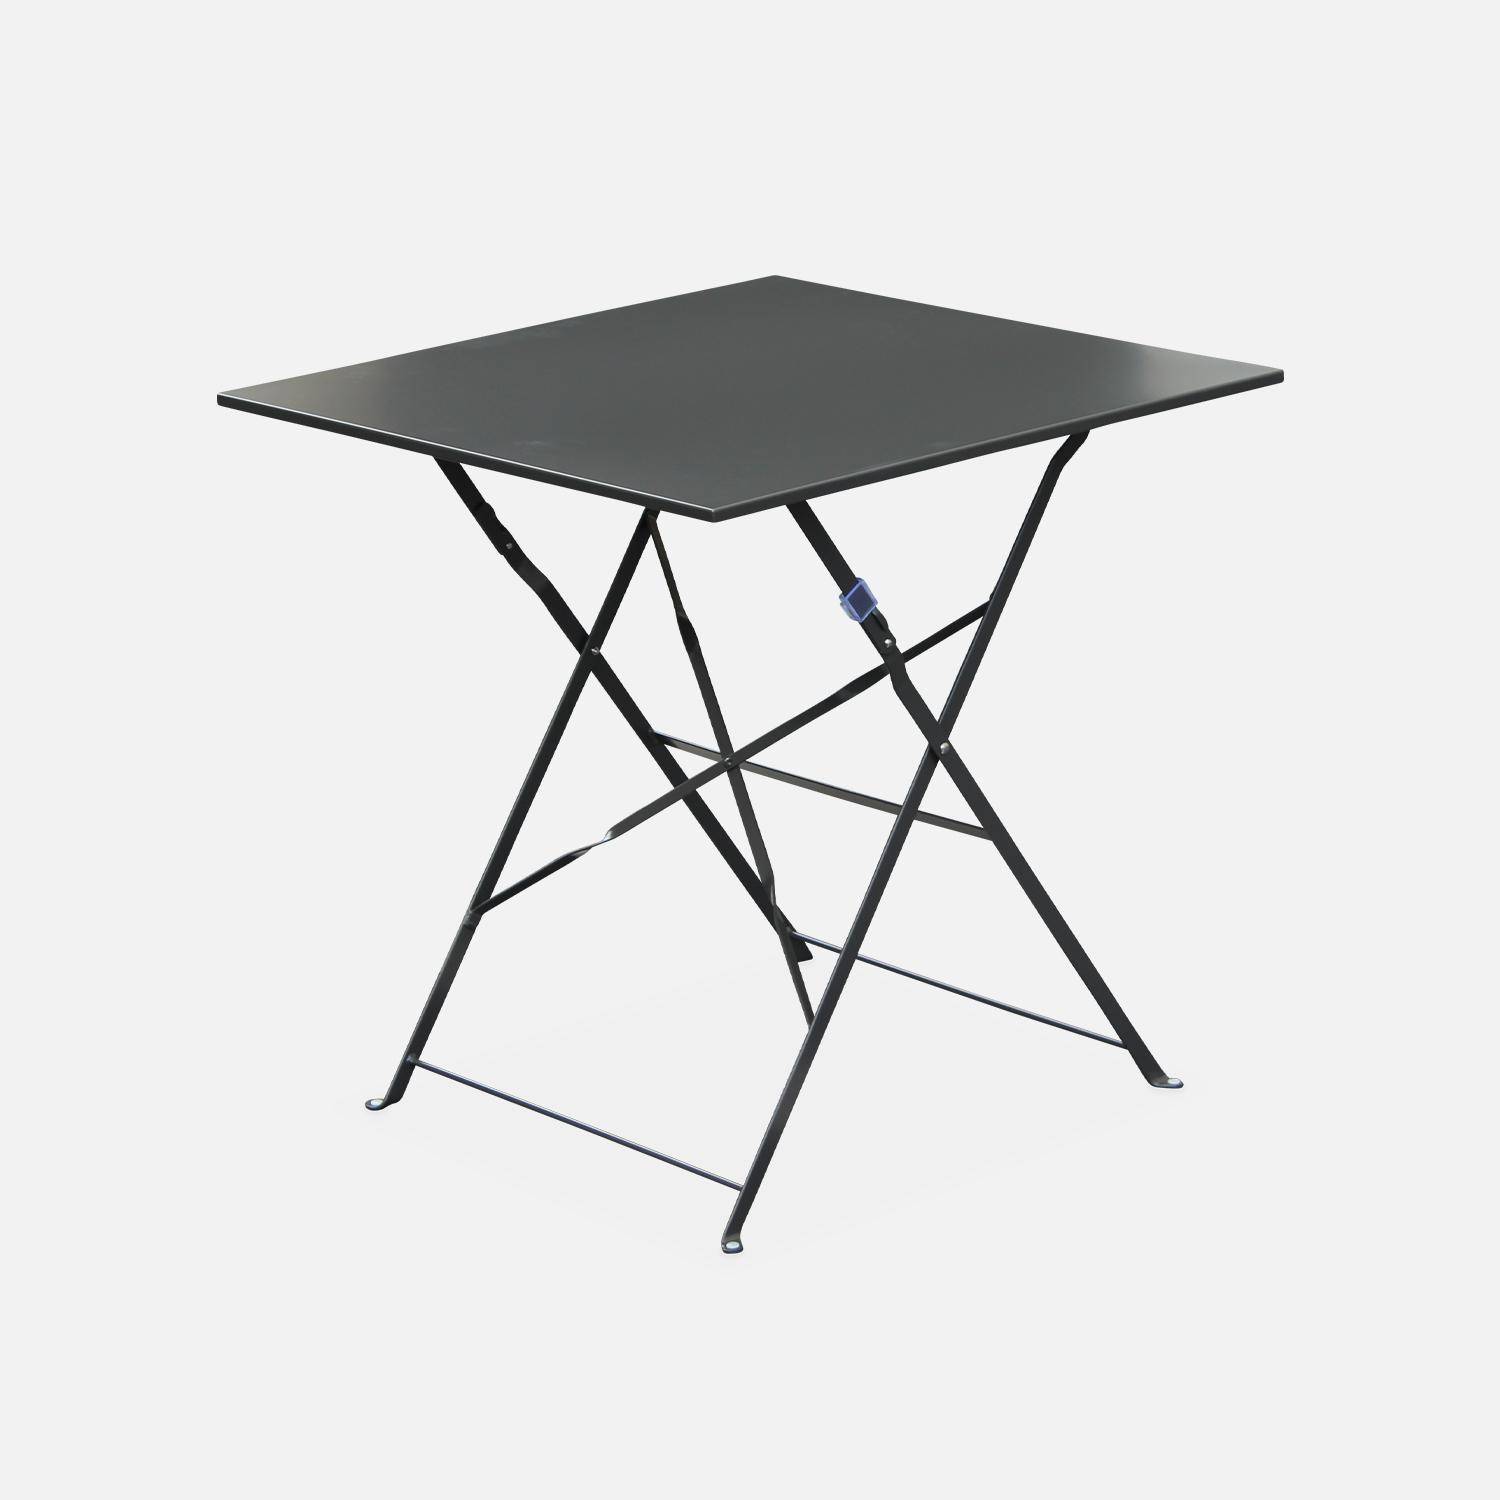 2-seater foldable thermo-lacquered steel bistro garden table, 70x70cm - Emilia - Anthracite Photo2